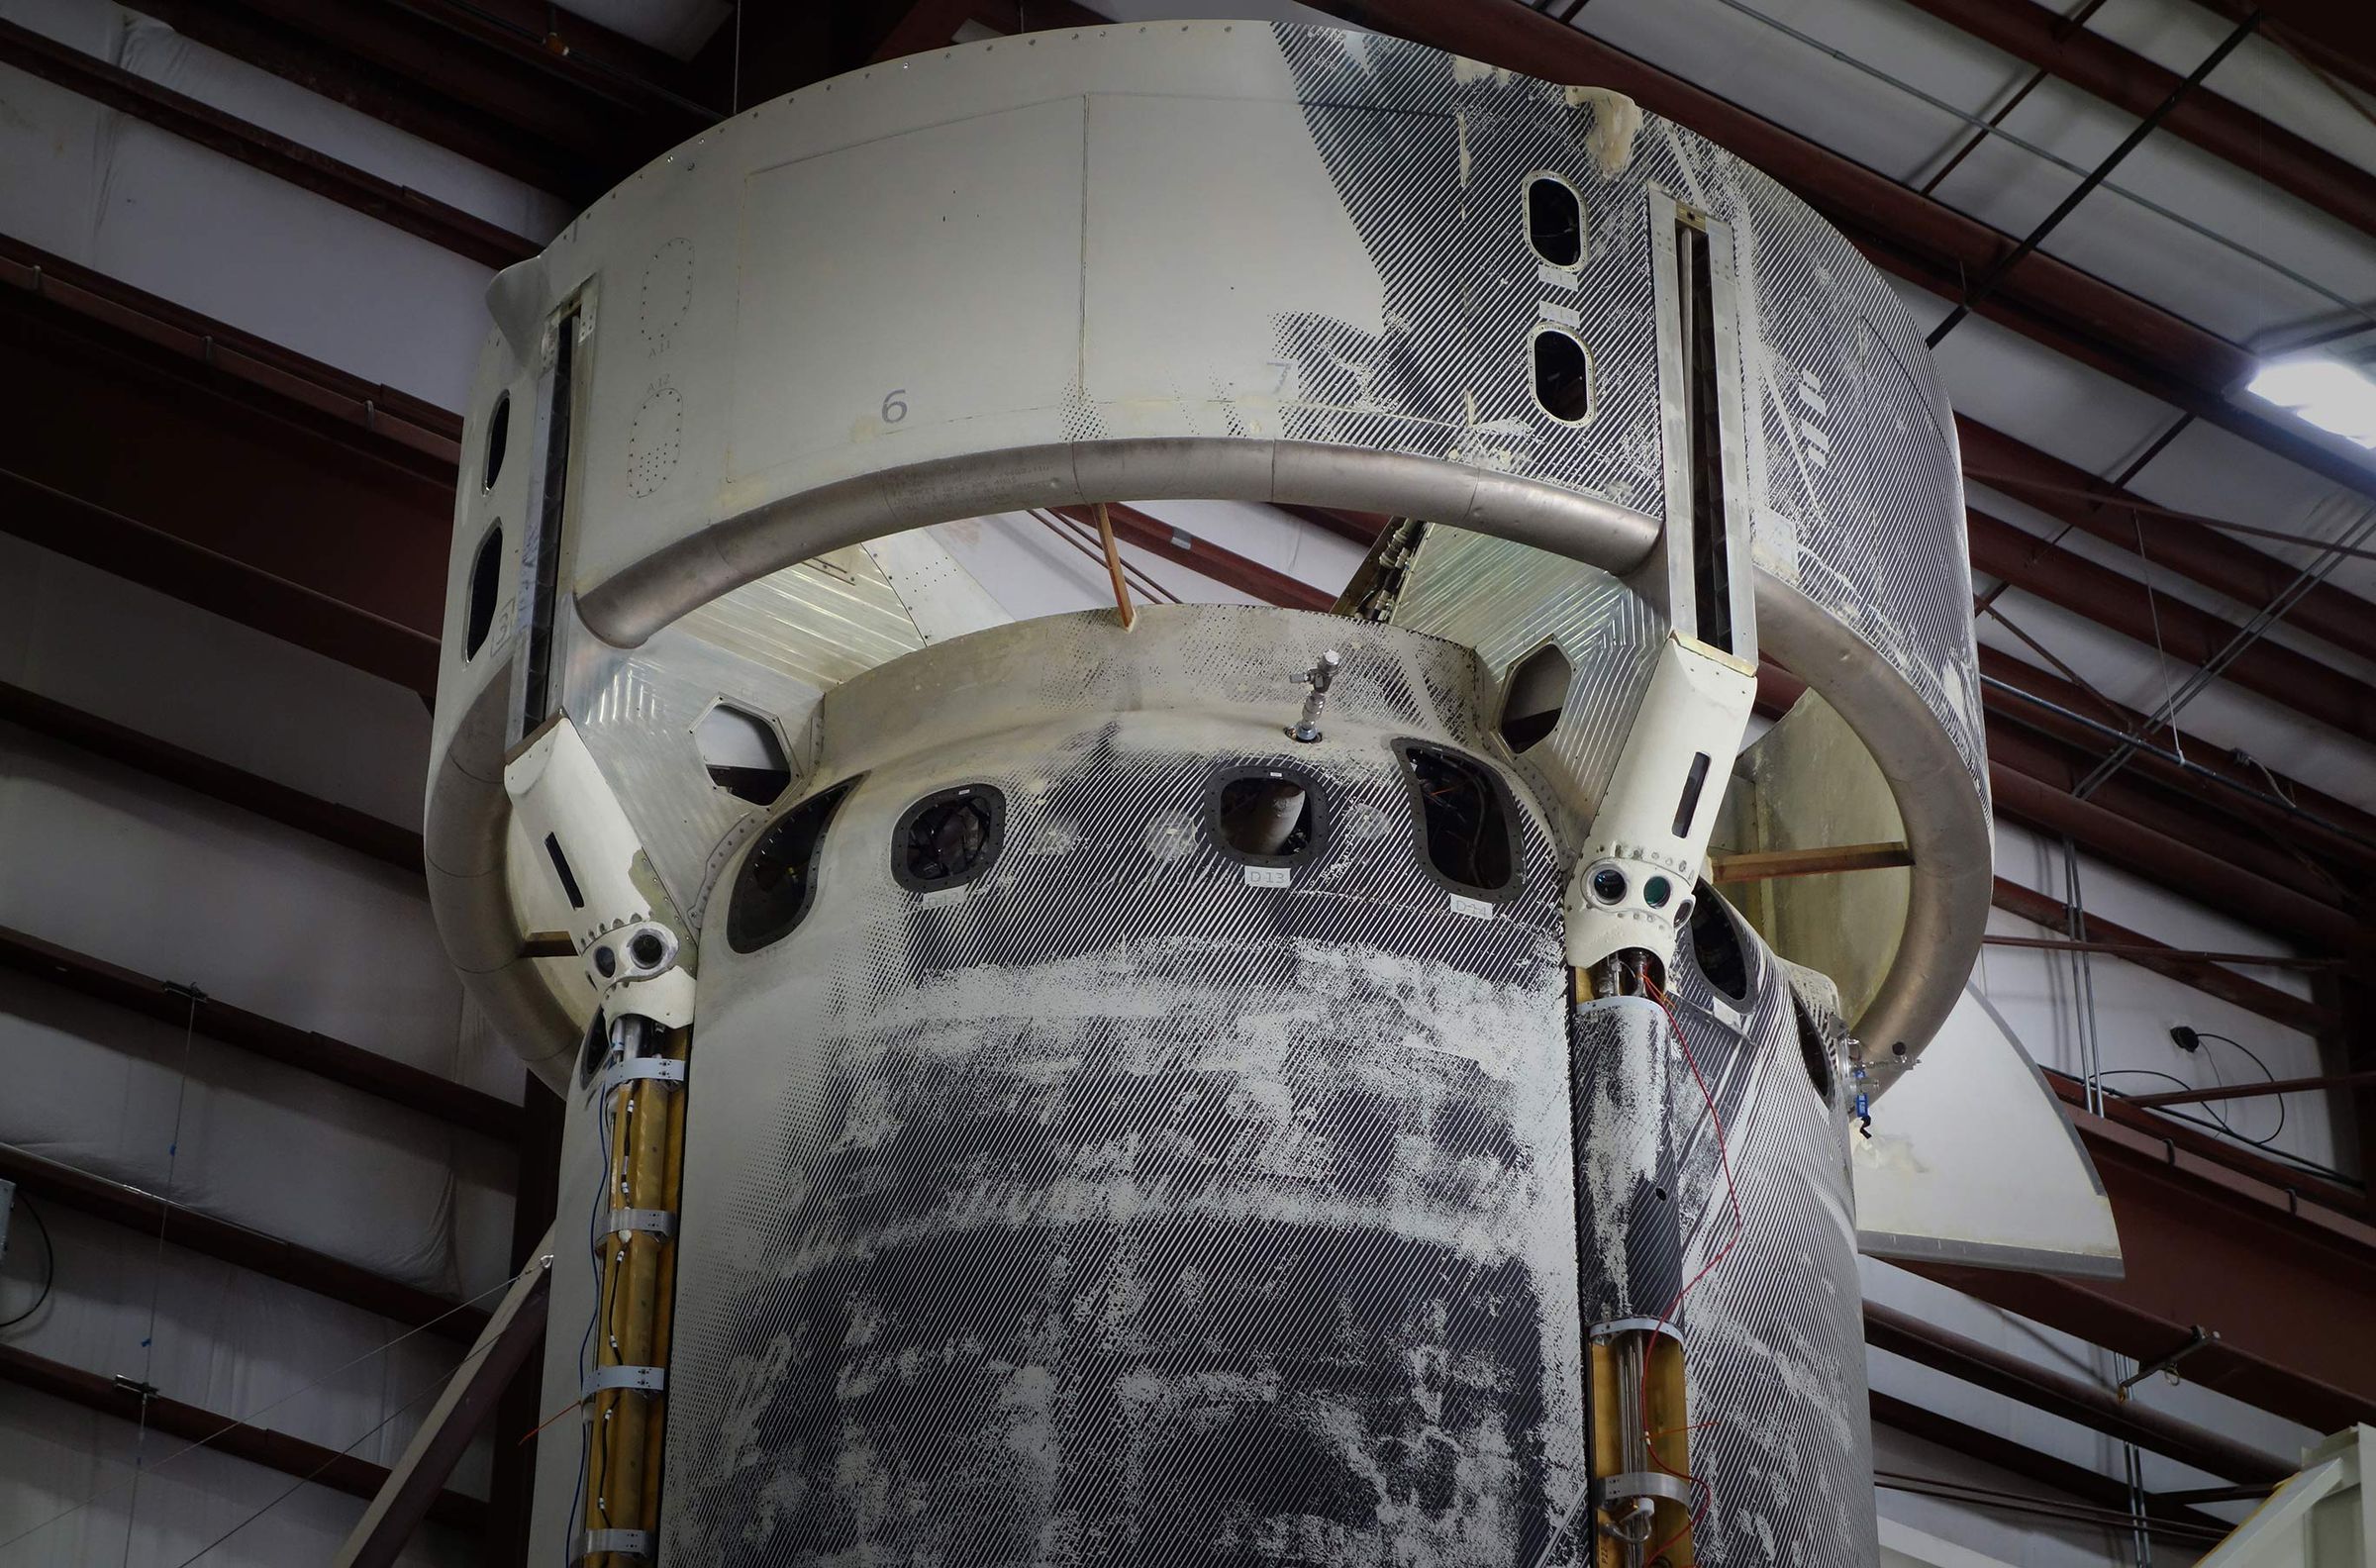 The New Shepard rocket with NASA’s SPLICE experiment mounted on the outside. Two white sensor packages are attached to the bottom of the ring fin.